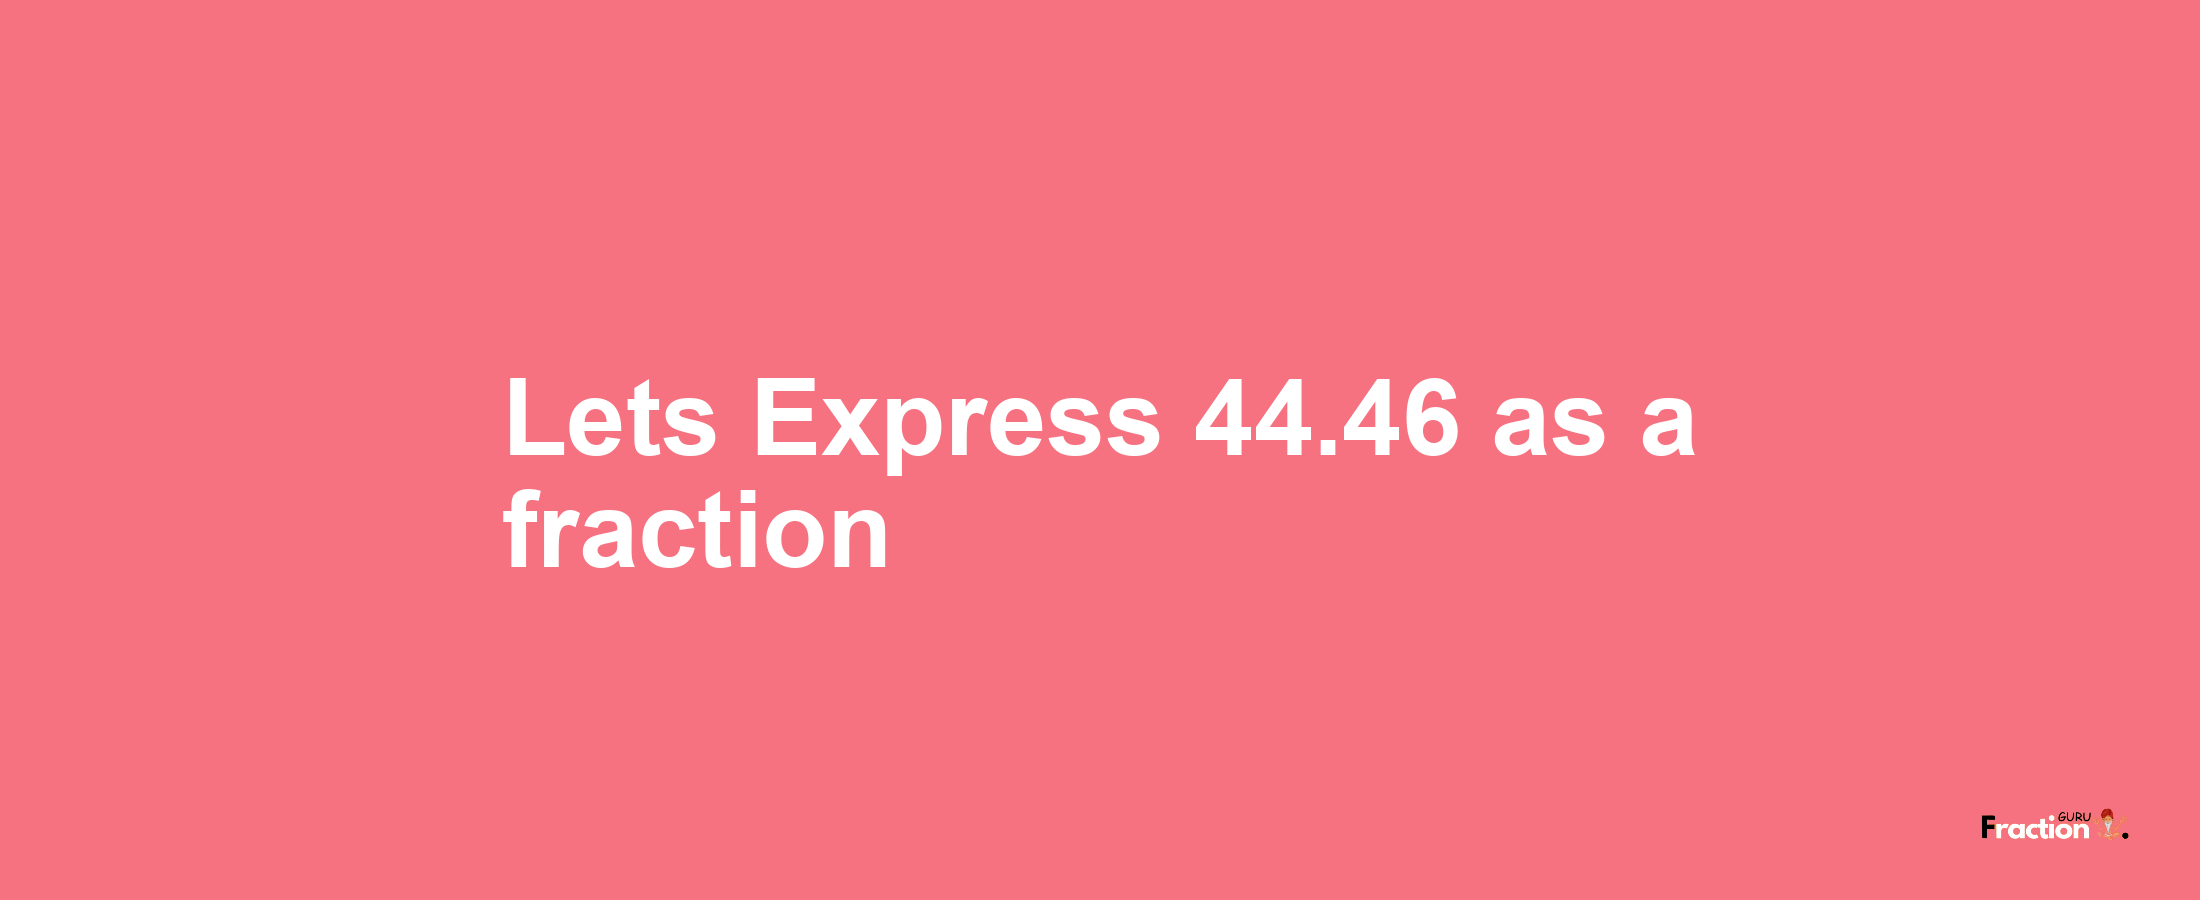 Lets Express 44.46 as afraction